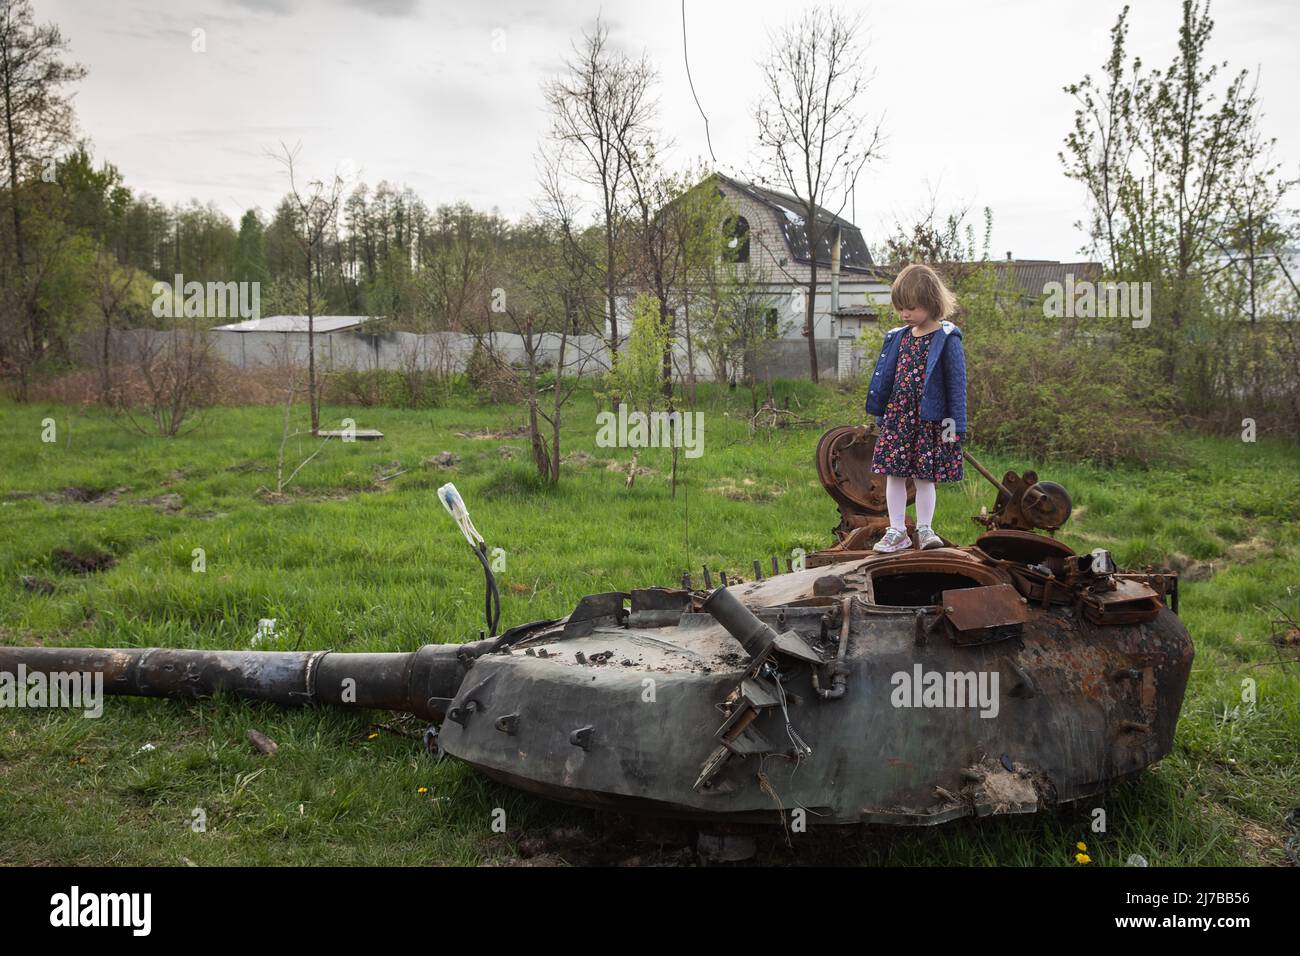 A girl stands on the tower of a destroyed Russian tank near Makariv village, Kyiv region. Russia invaded Ukraine on 24 February 2022, triggering the largest military attack in Europe since World War II. Stock Photo